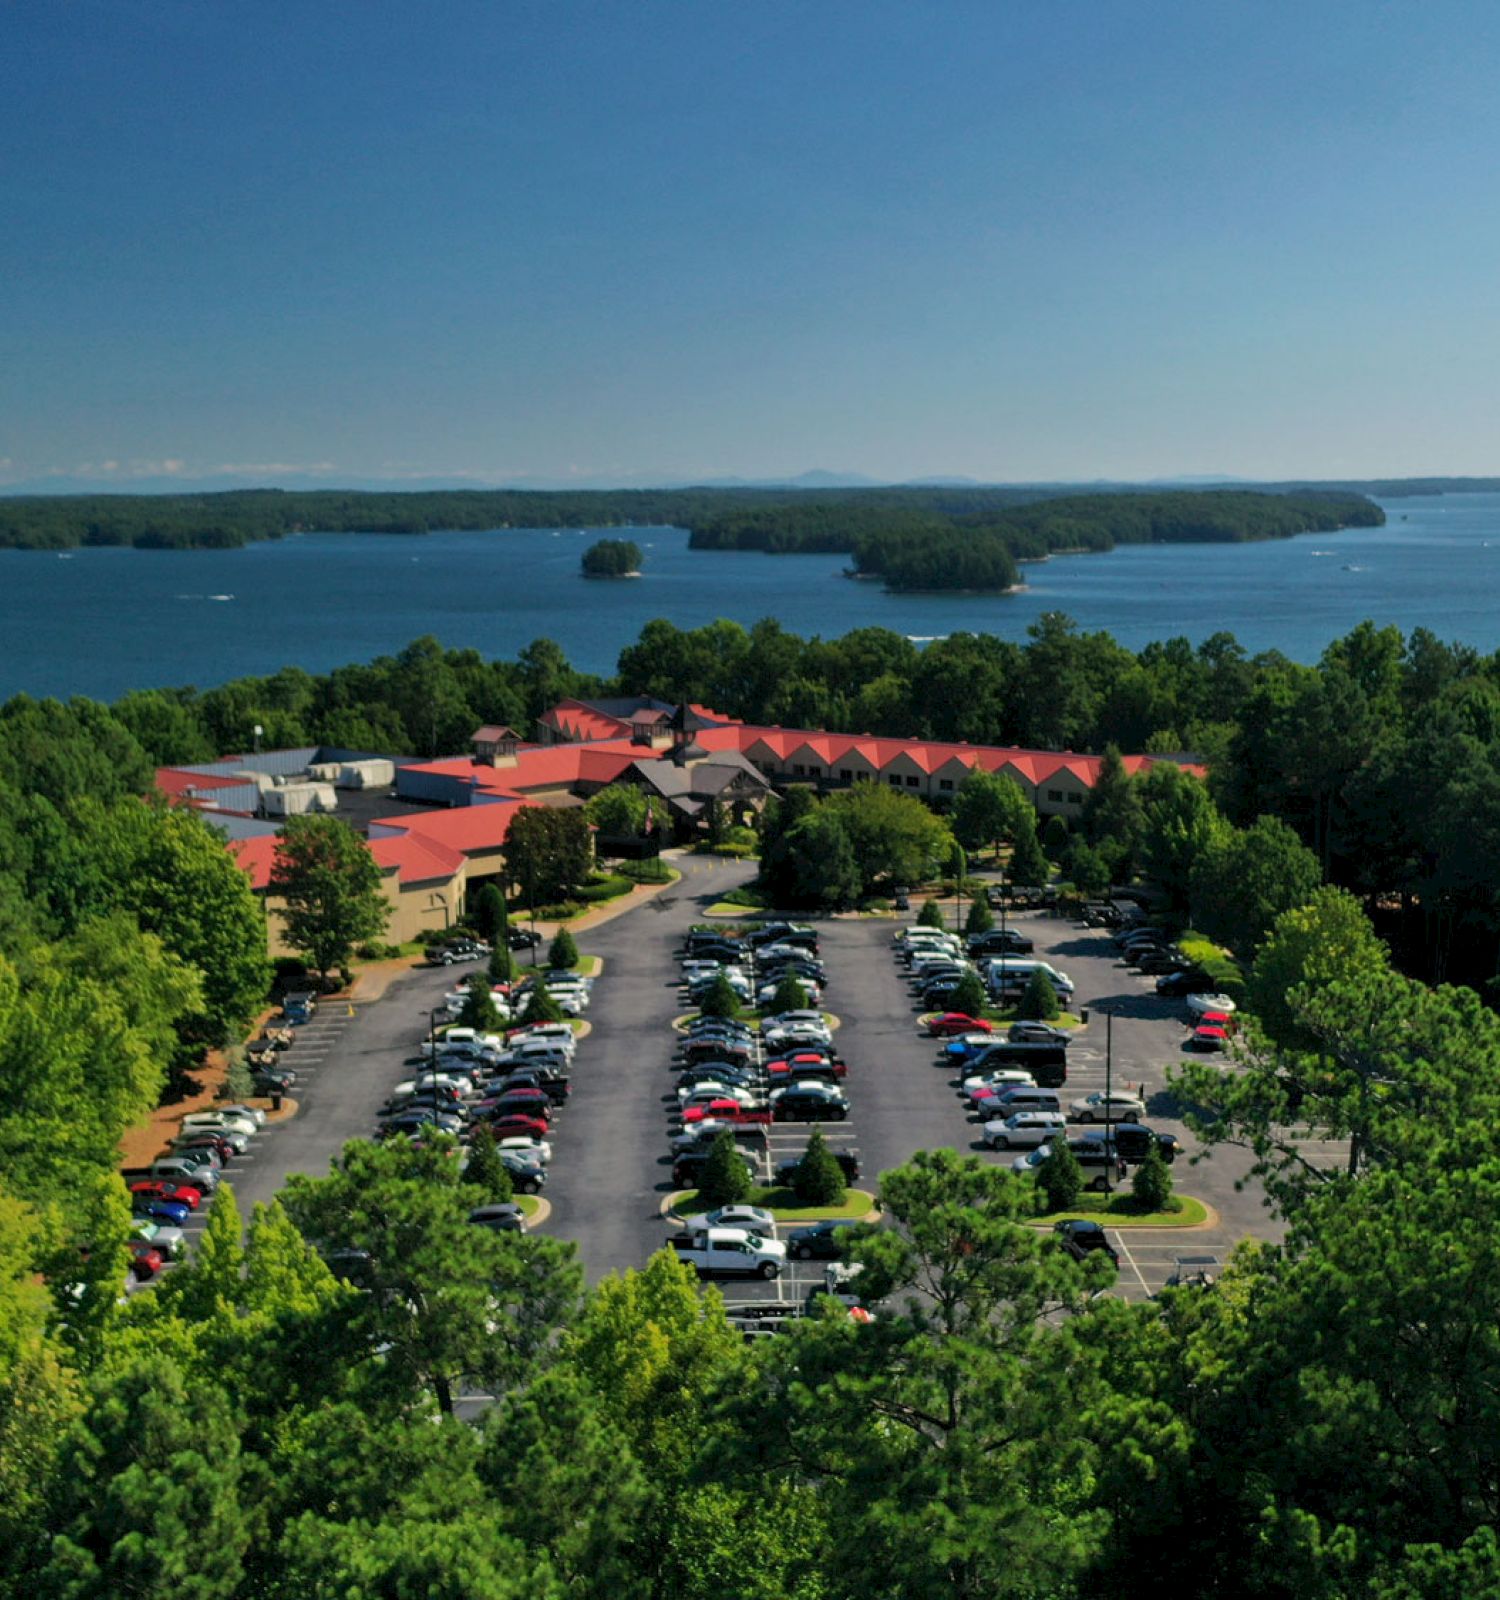 Aerial view of a large building with red roofs, surrounded by trees, near a lake with parked cars.